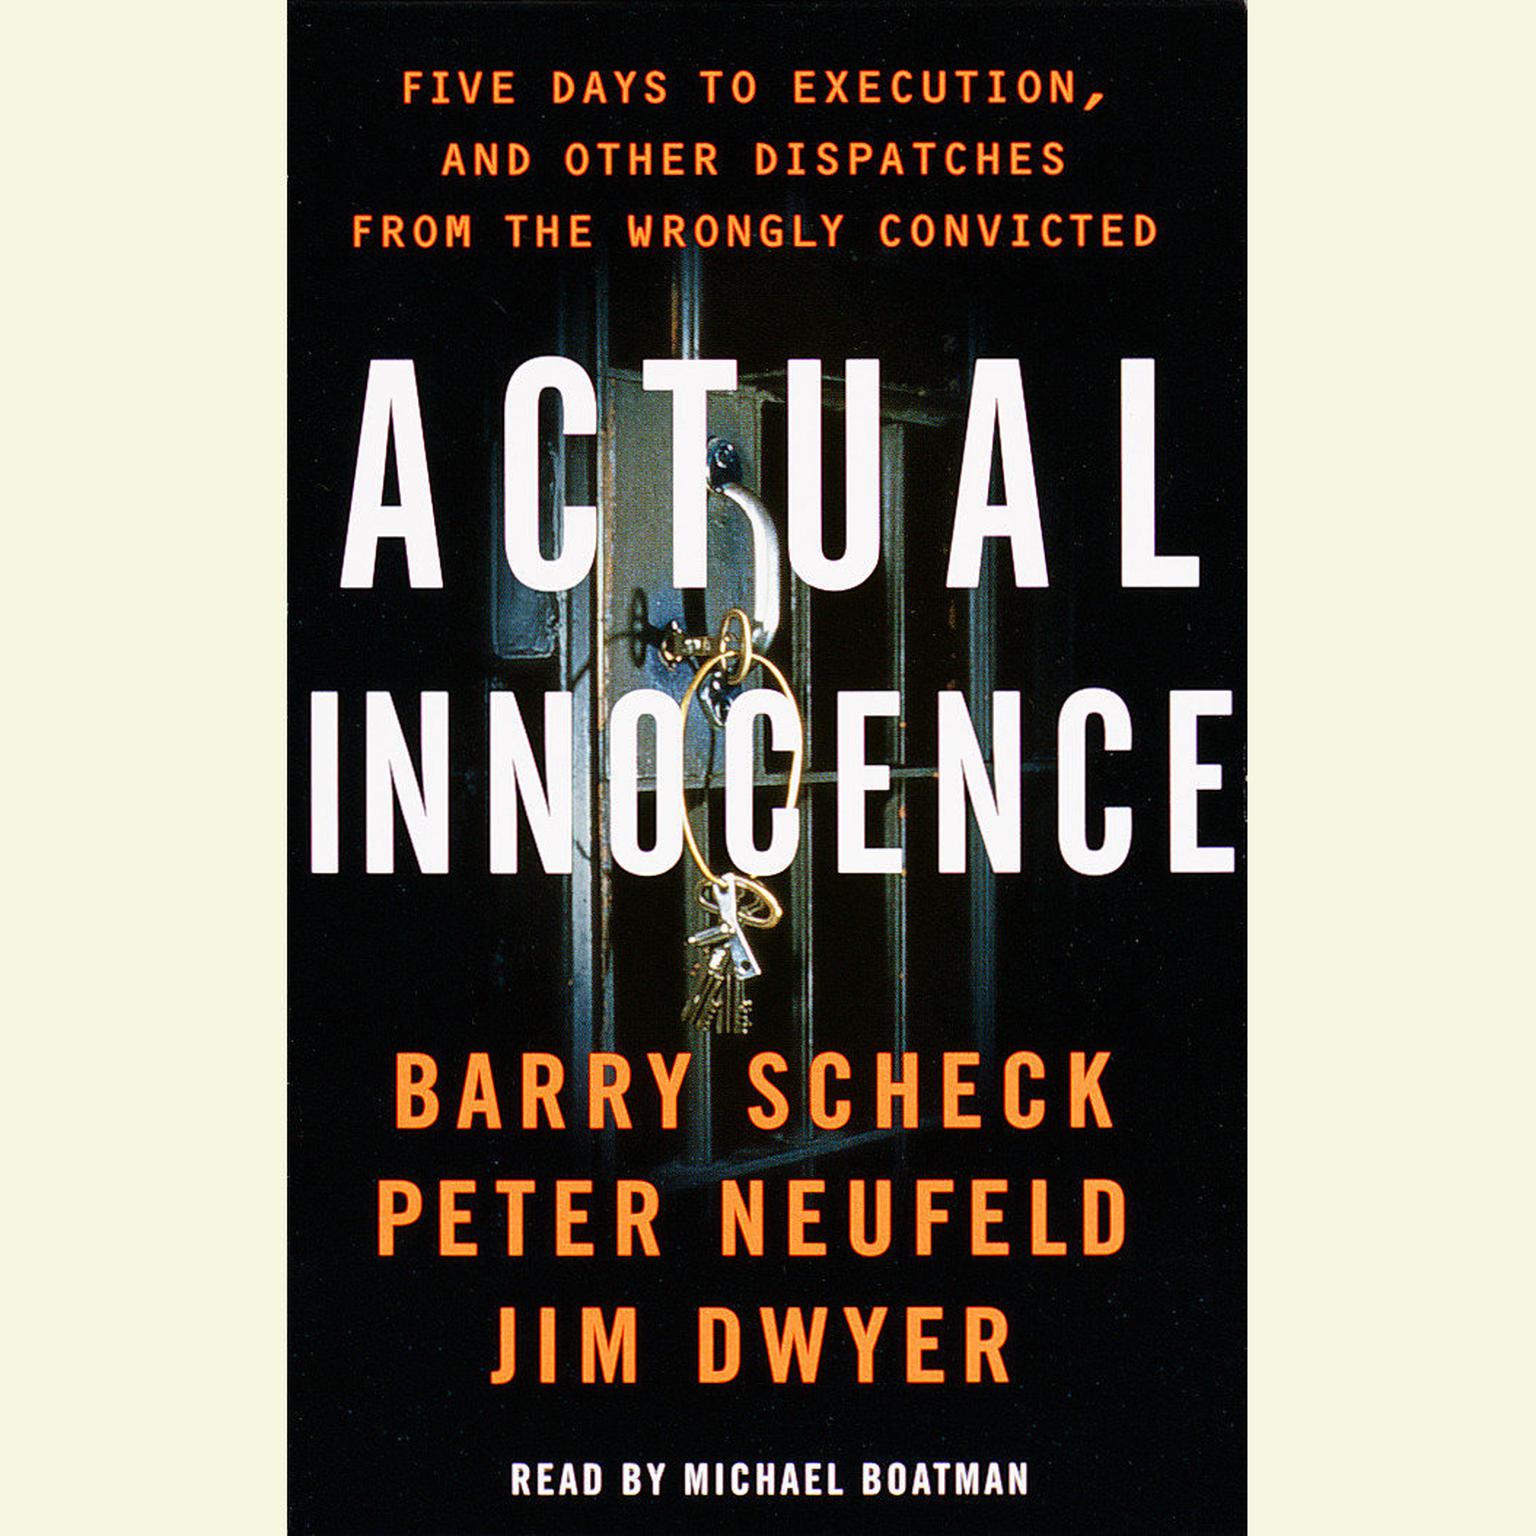 Actual Innocence (Abridged): Five Days to Exexution and Other Dispatches of the Wrongly Convicted Audiobook, by Barry Scheck